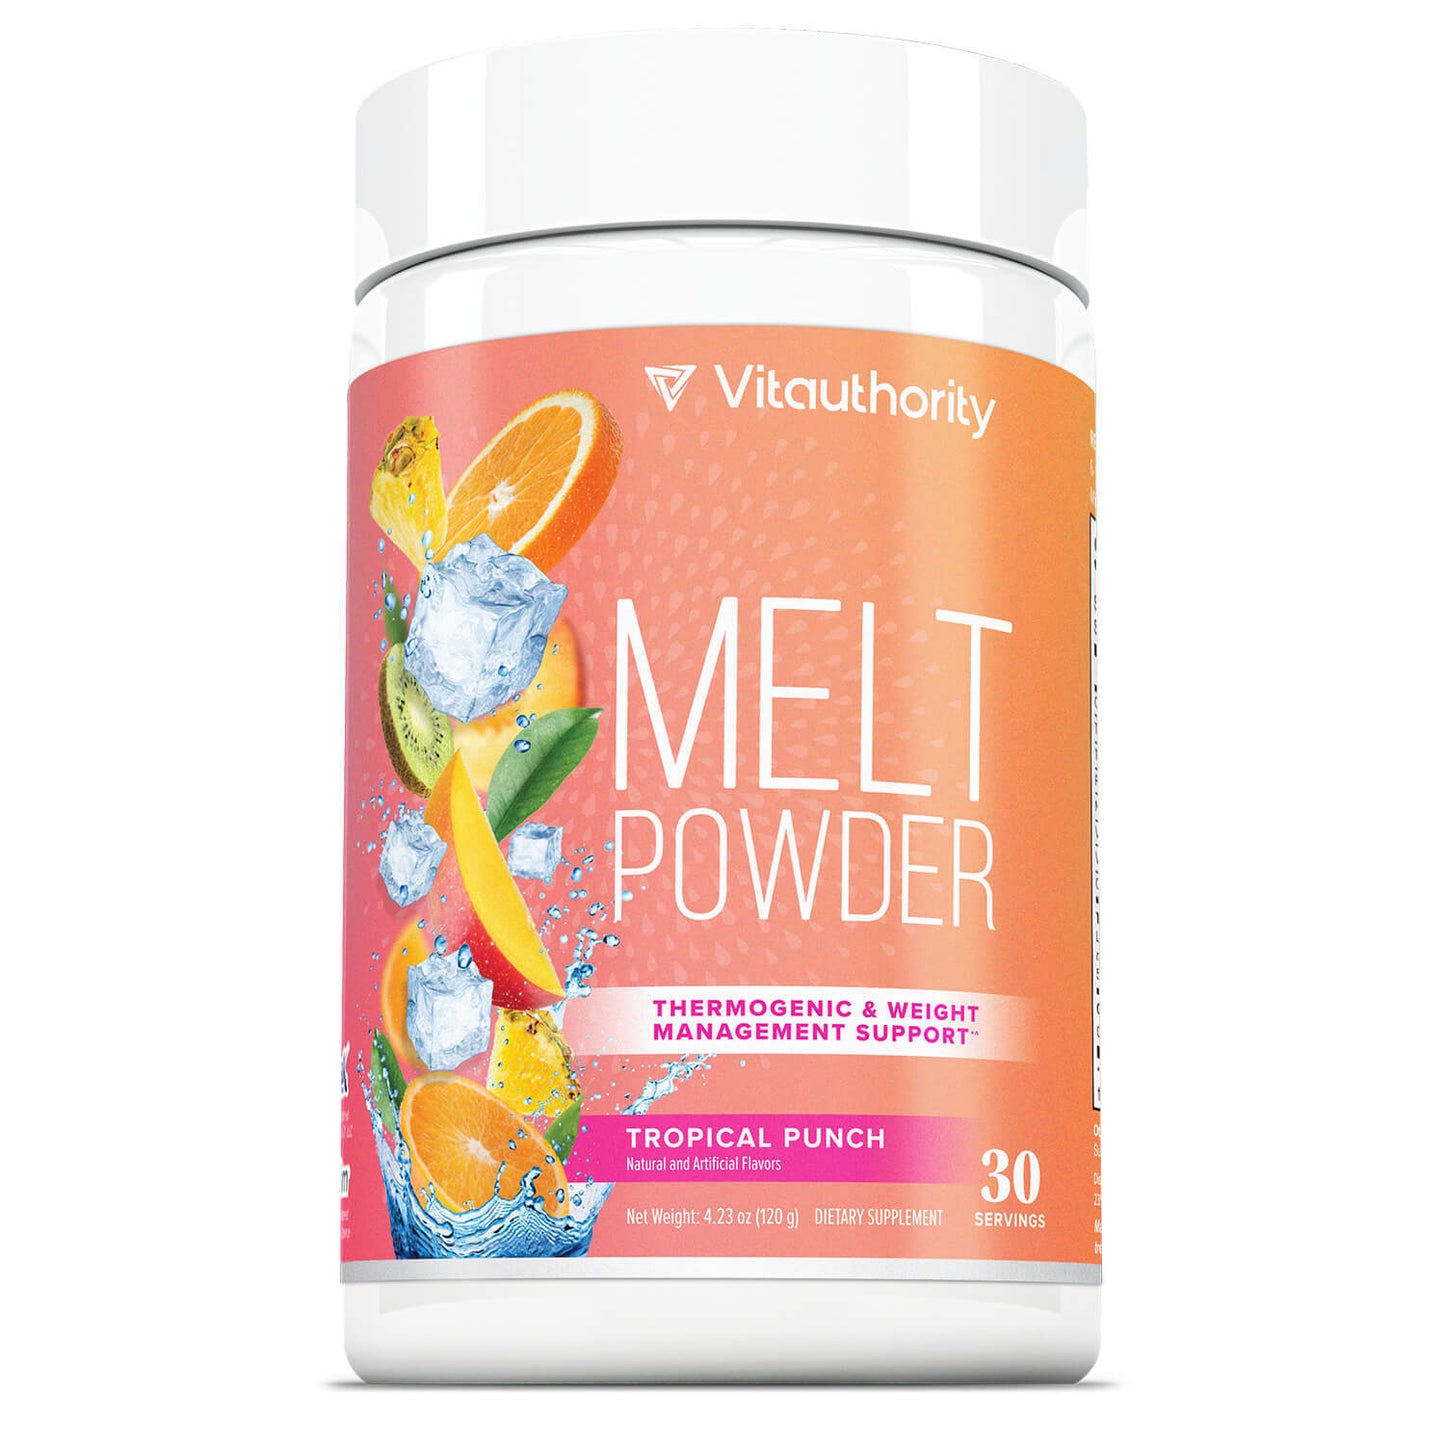 Melt - Comprehensive Thermogenic & Metabolism Support